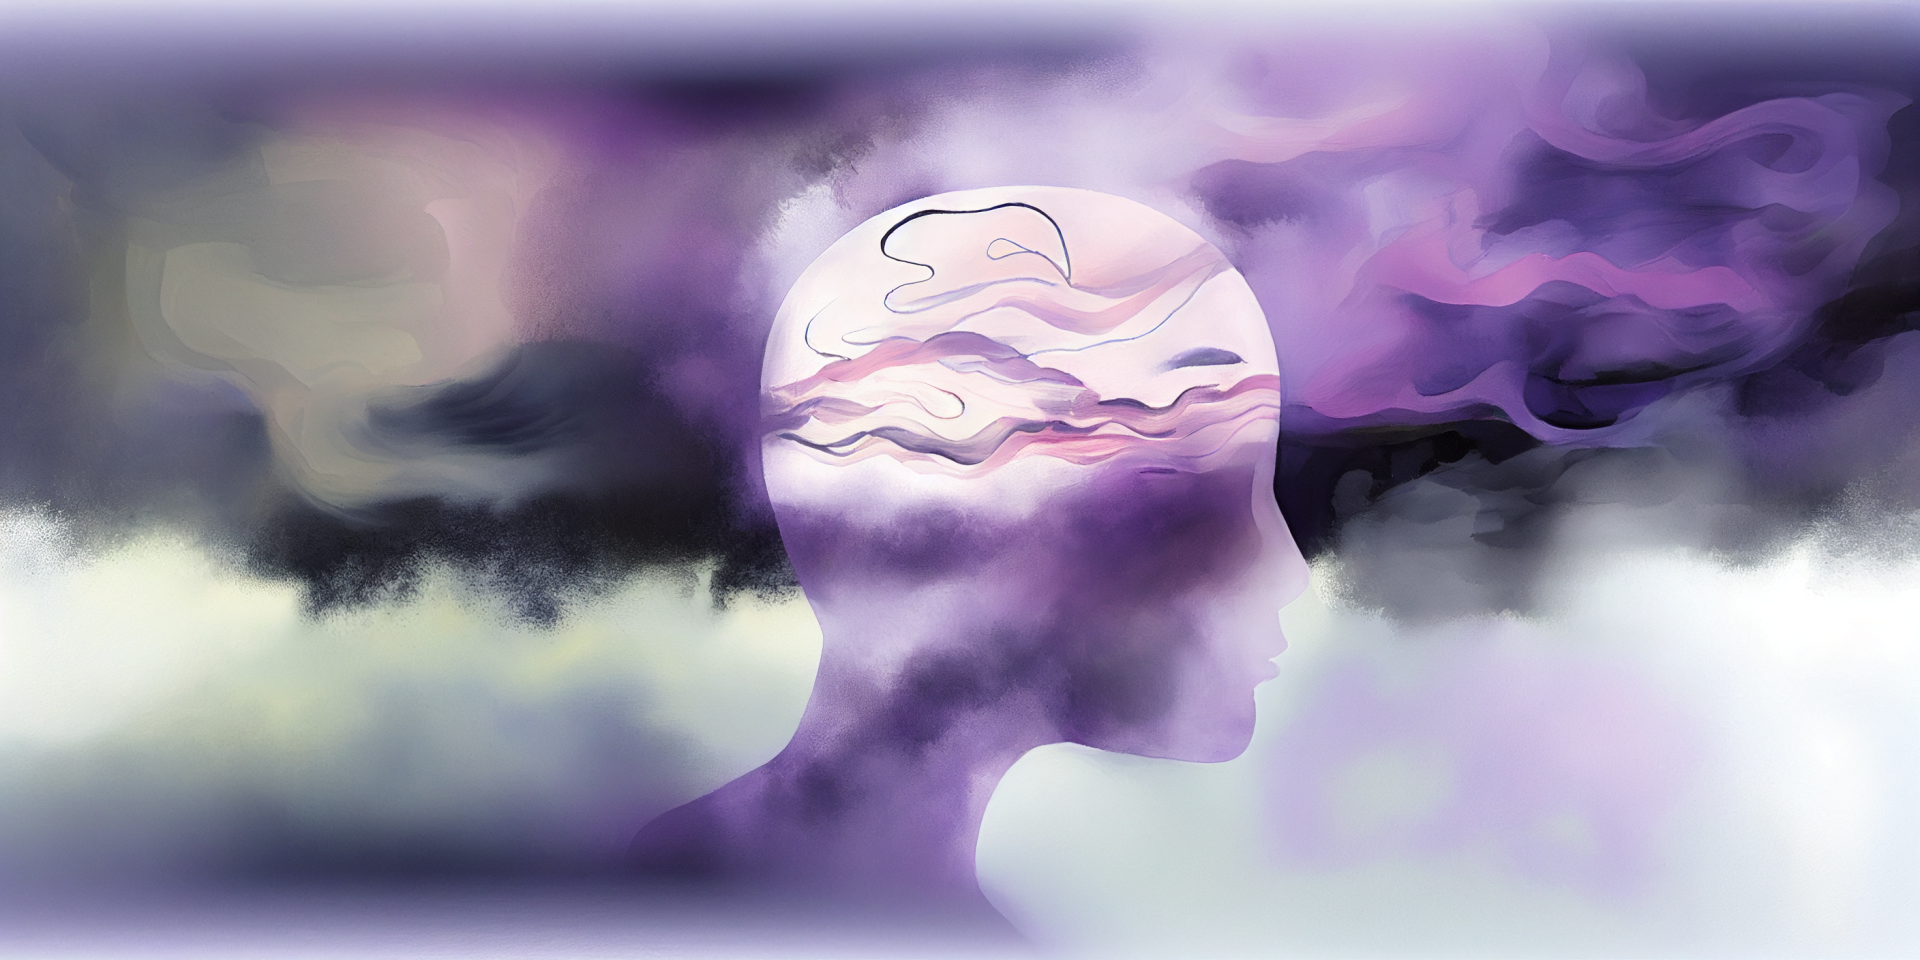 watercolor image of a head surrounded by clouds whose inside doesn't match the surroundings, symbolizing the lack of insight associated with anosognosia